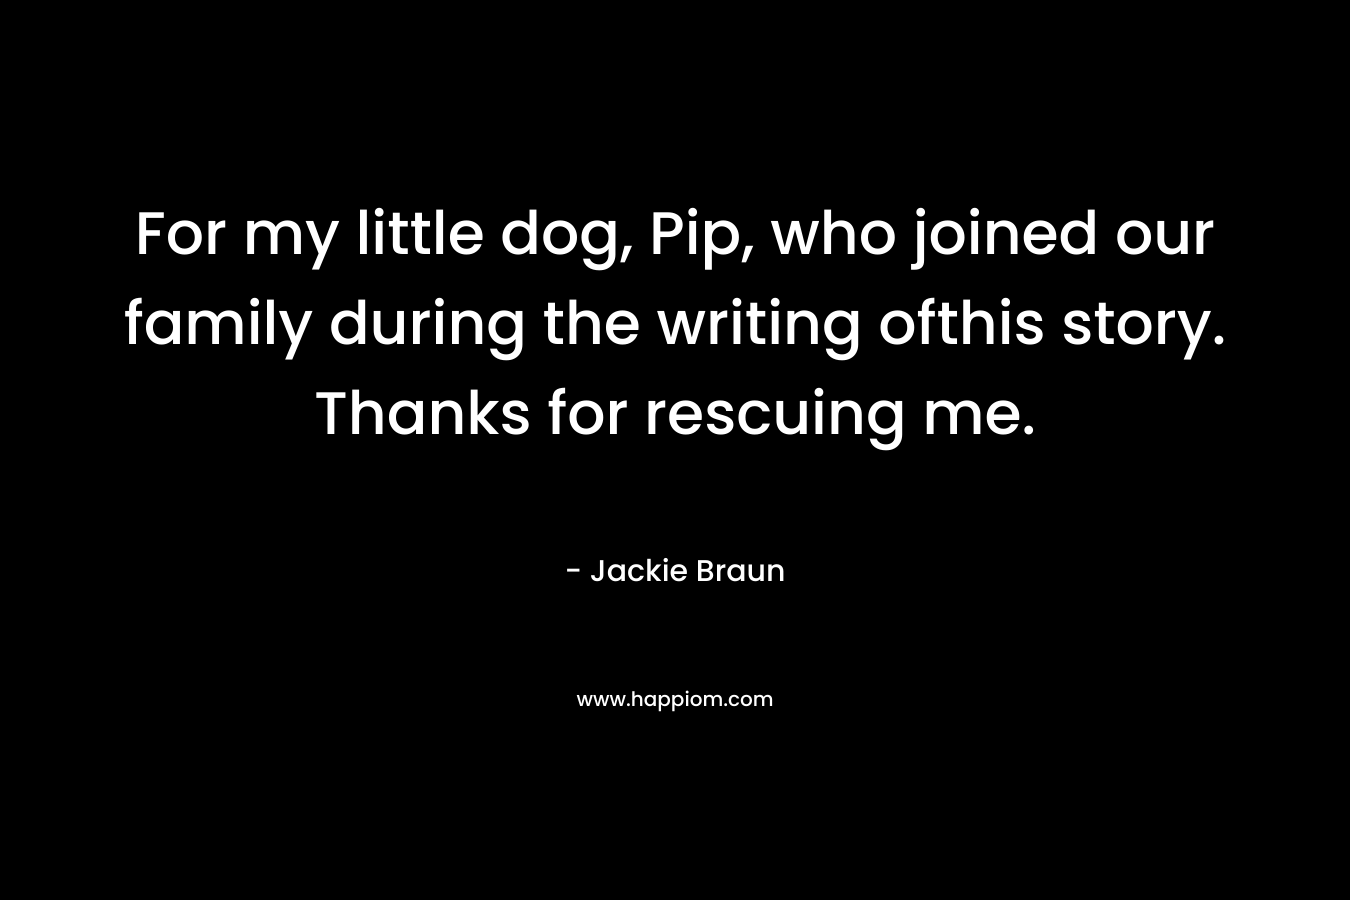 For my little dog, Pip, who joined our family during the writing ofthis story. Thanks for rescuing me. – Jackie Braun